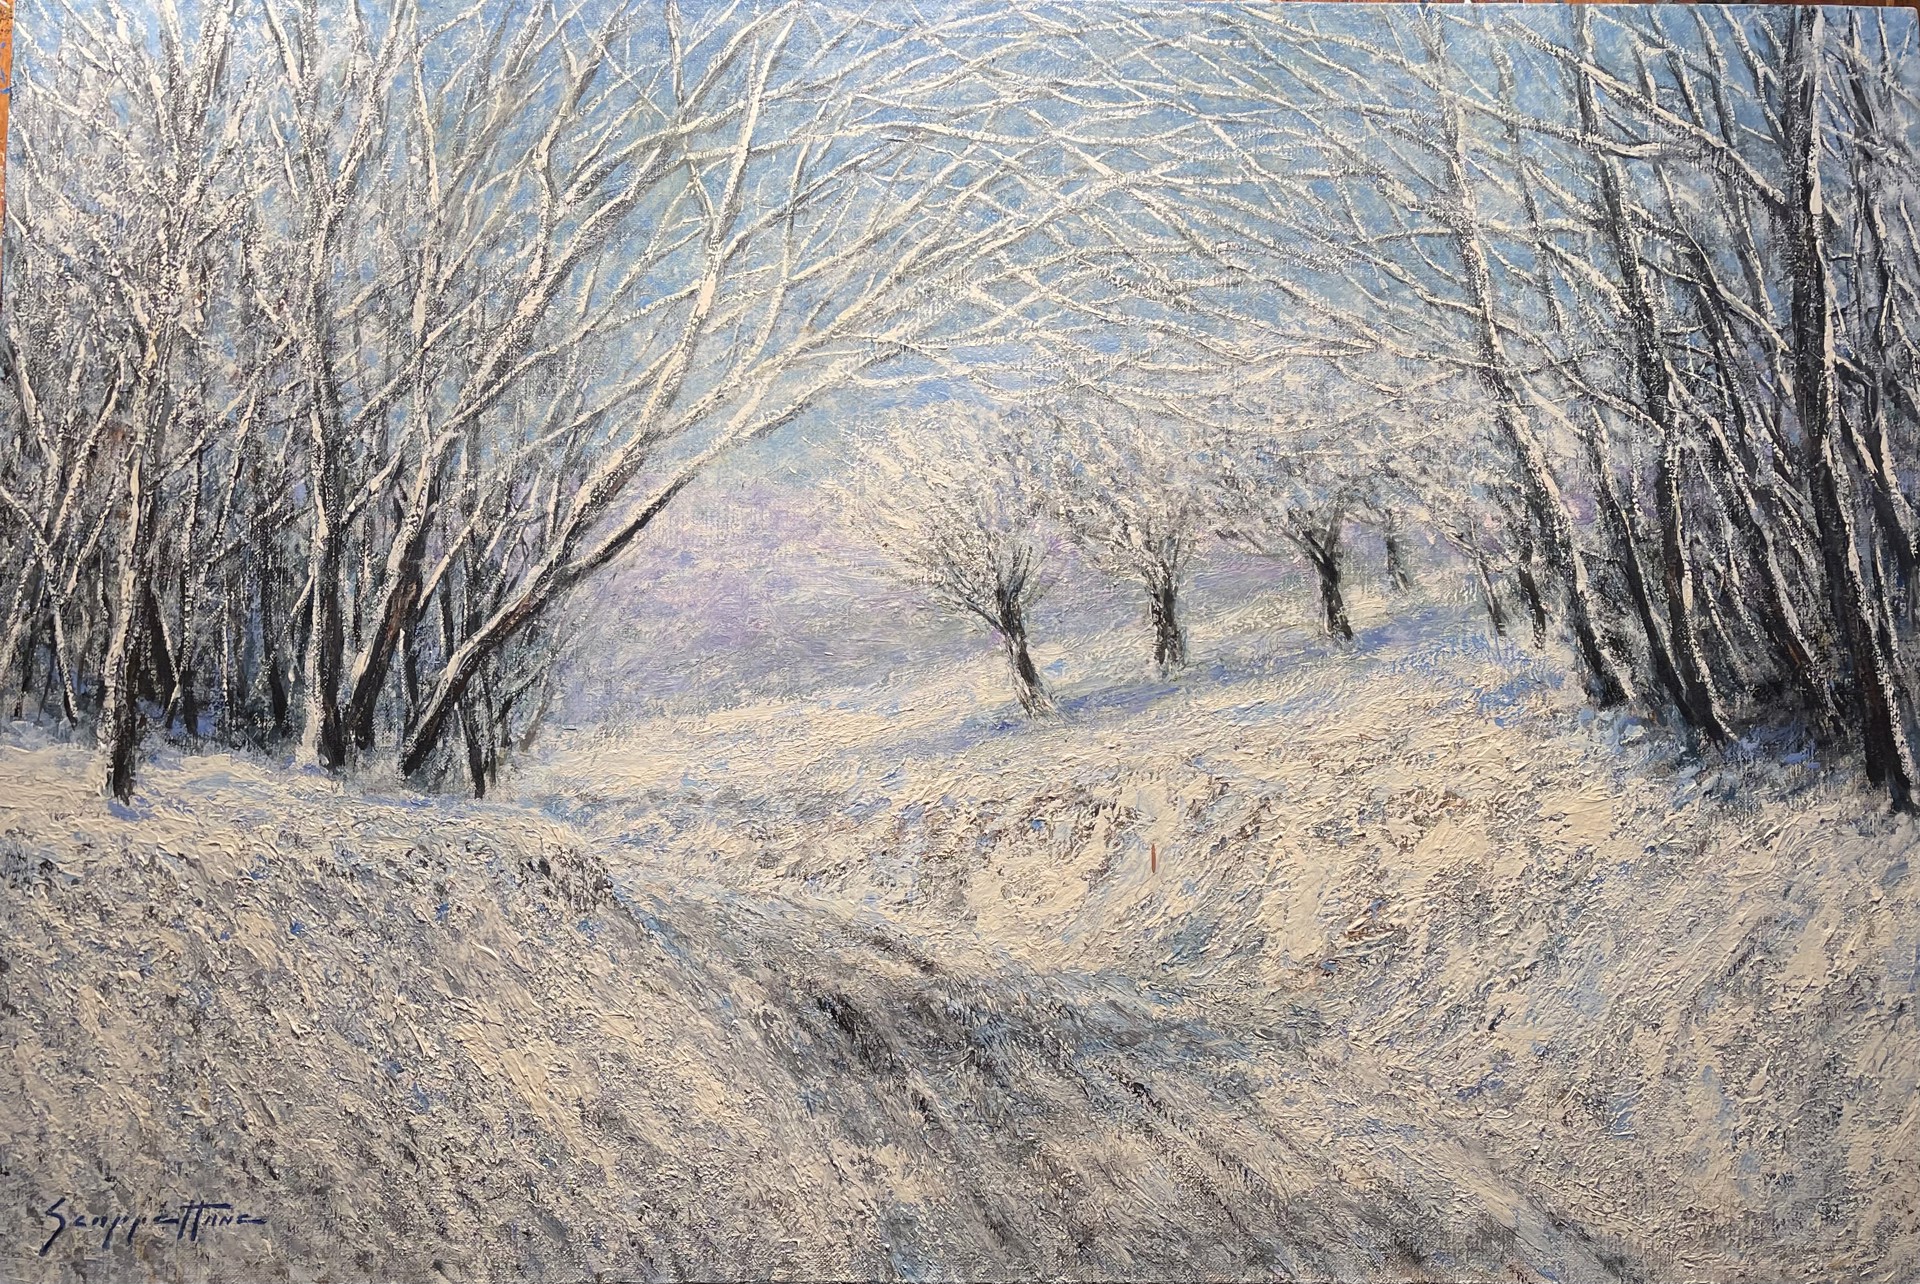 Orchard Under Snow by James Scoppettone